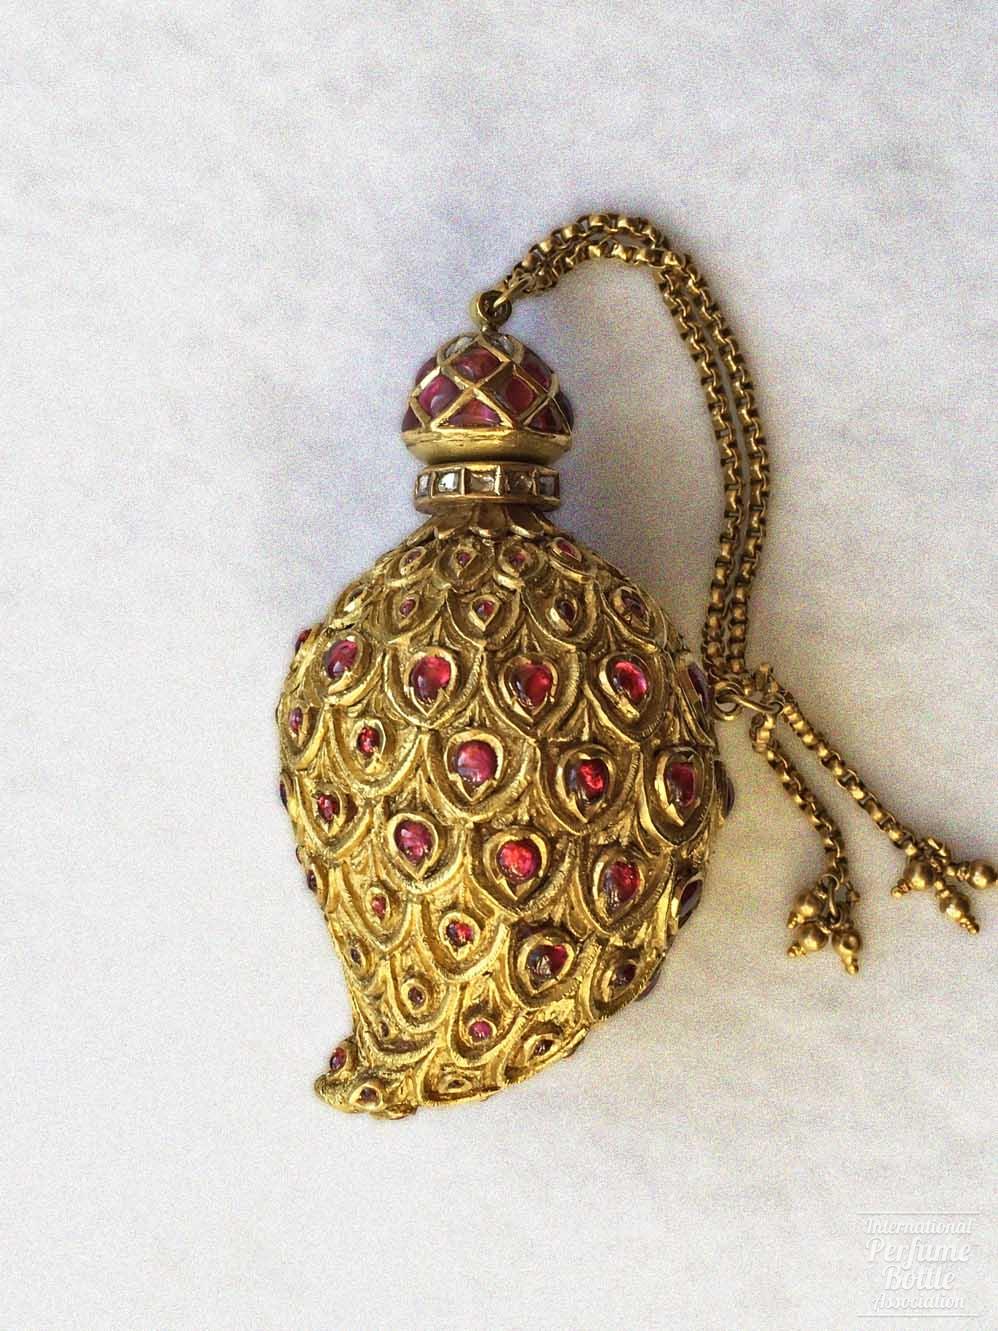 Witch's Heart Bottle from India